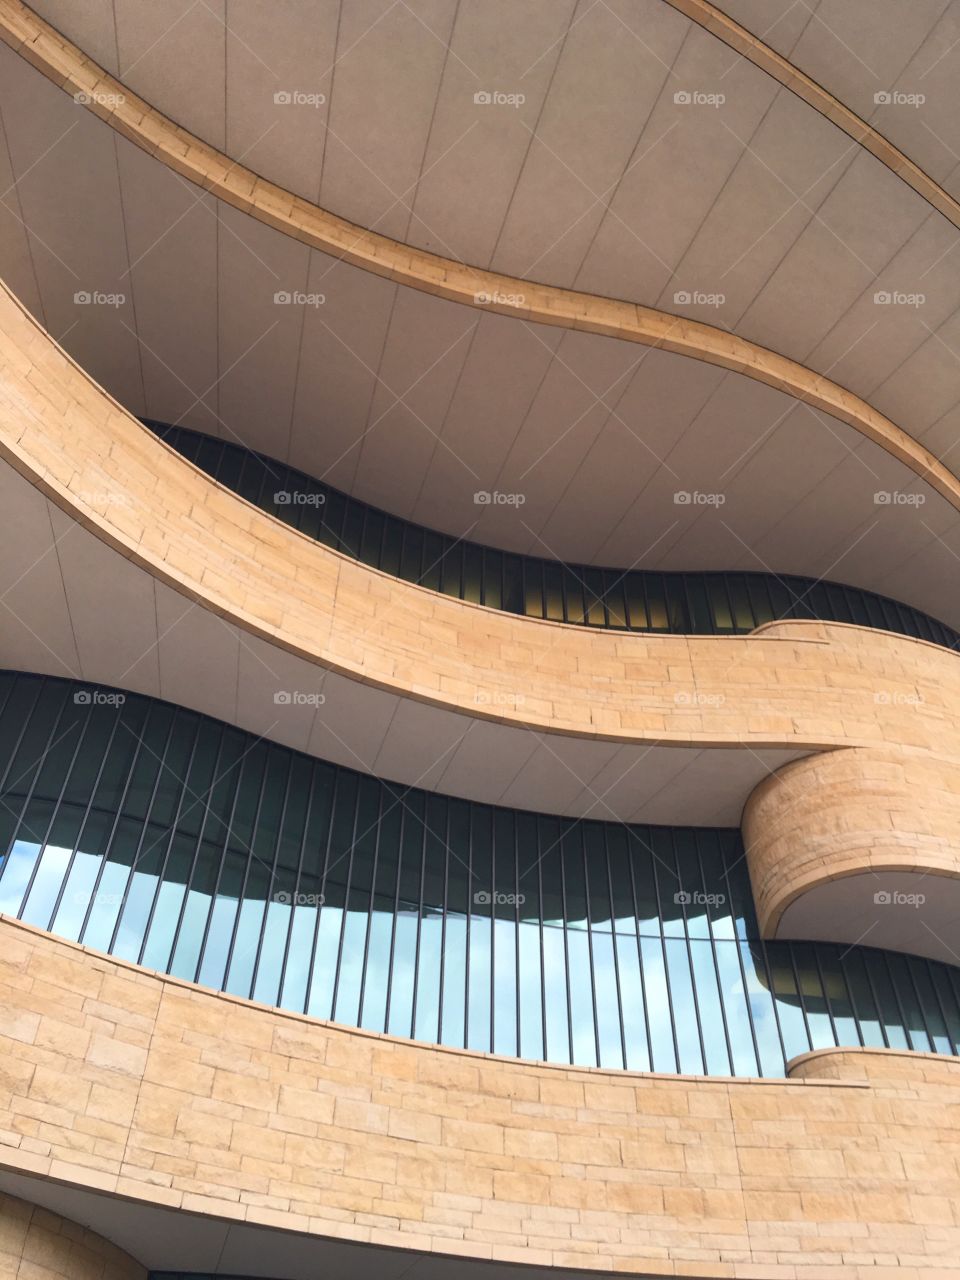 View of the fantastic exterior architecture of the National Museum of the American Indian In Washington D. C.